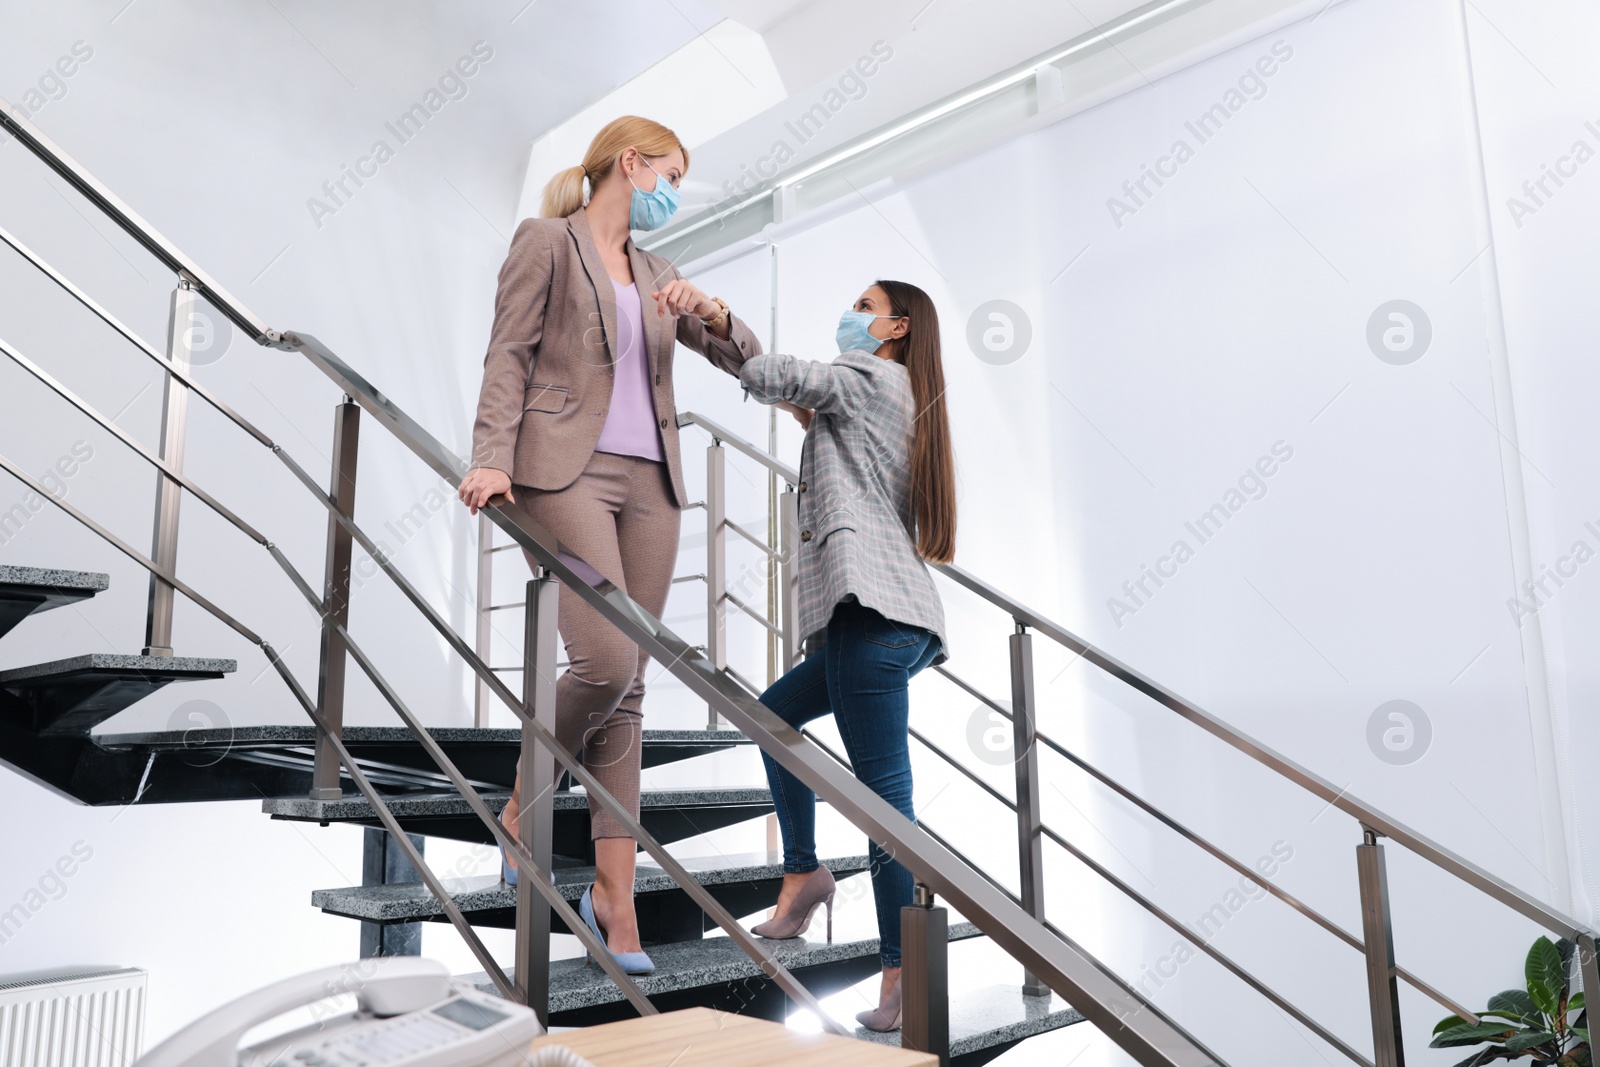 Photo of Office employees in masks greeting each other by bumping elbows on stairs